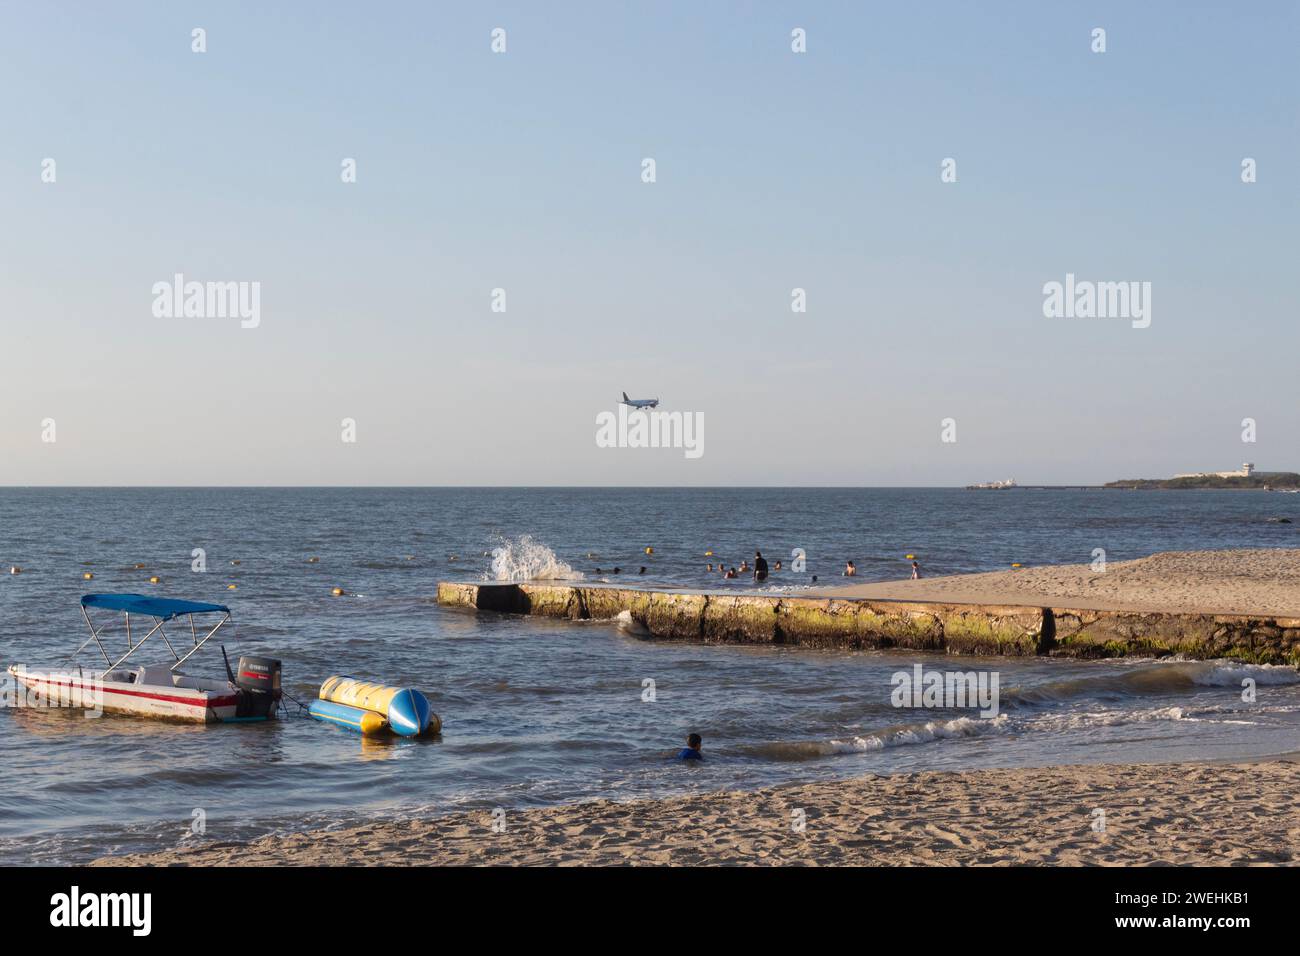 An airplane landing on simon bolivar international airport viewed from a resort beach with banana boat ride a shore in sunset golden hour Stock Photo